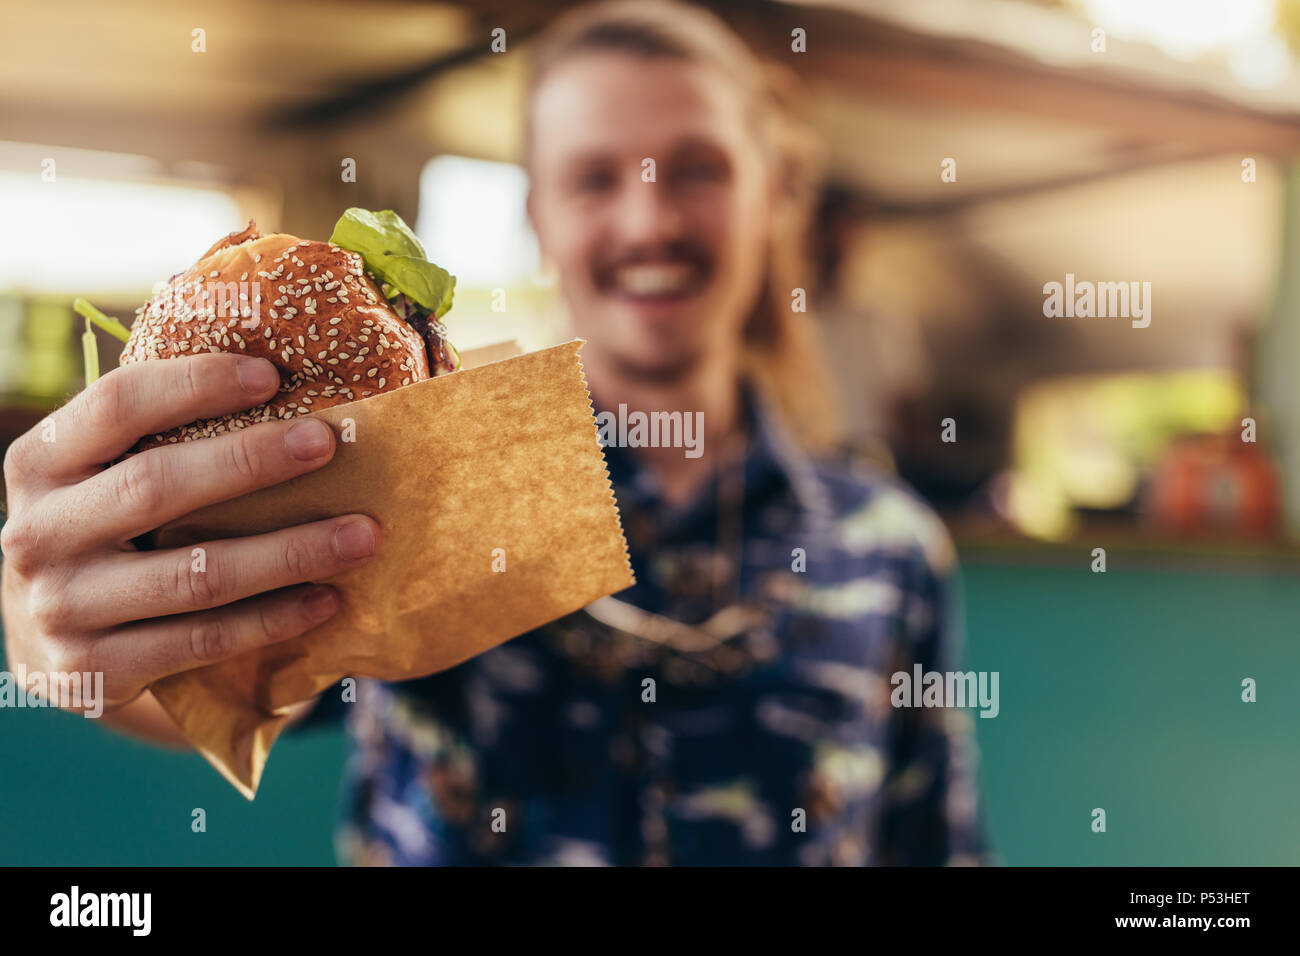 Closeup of young hipster man holding a burger in hands. Focus on hands holding food truck burger. Stock Photo